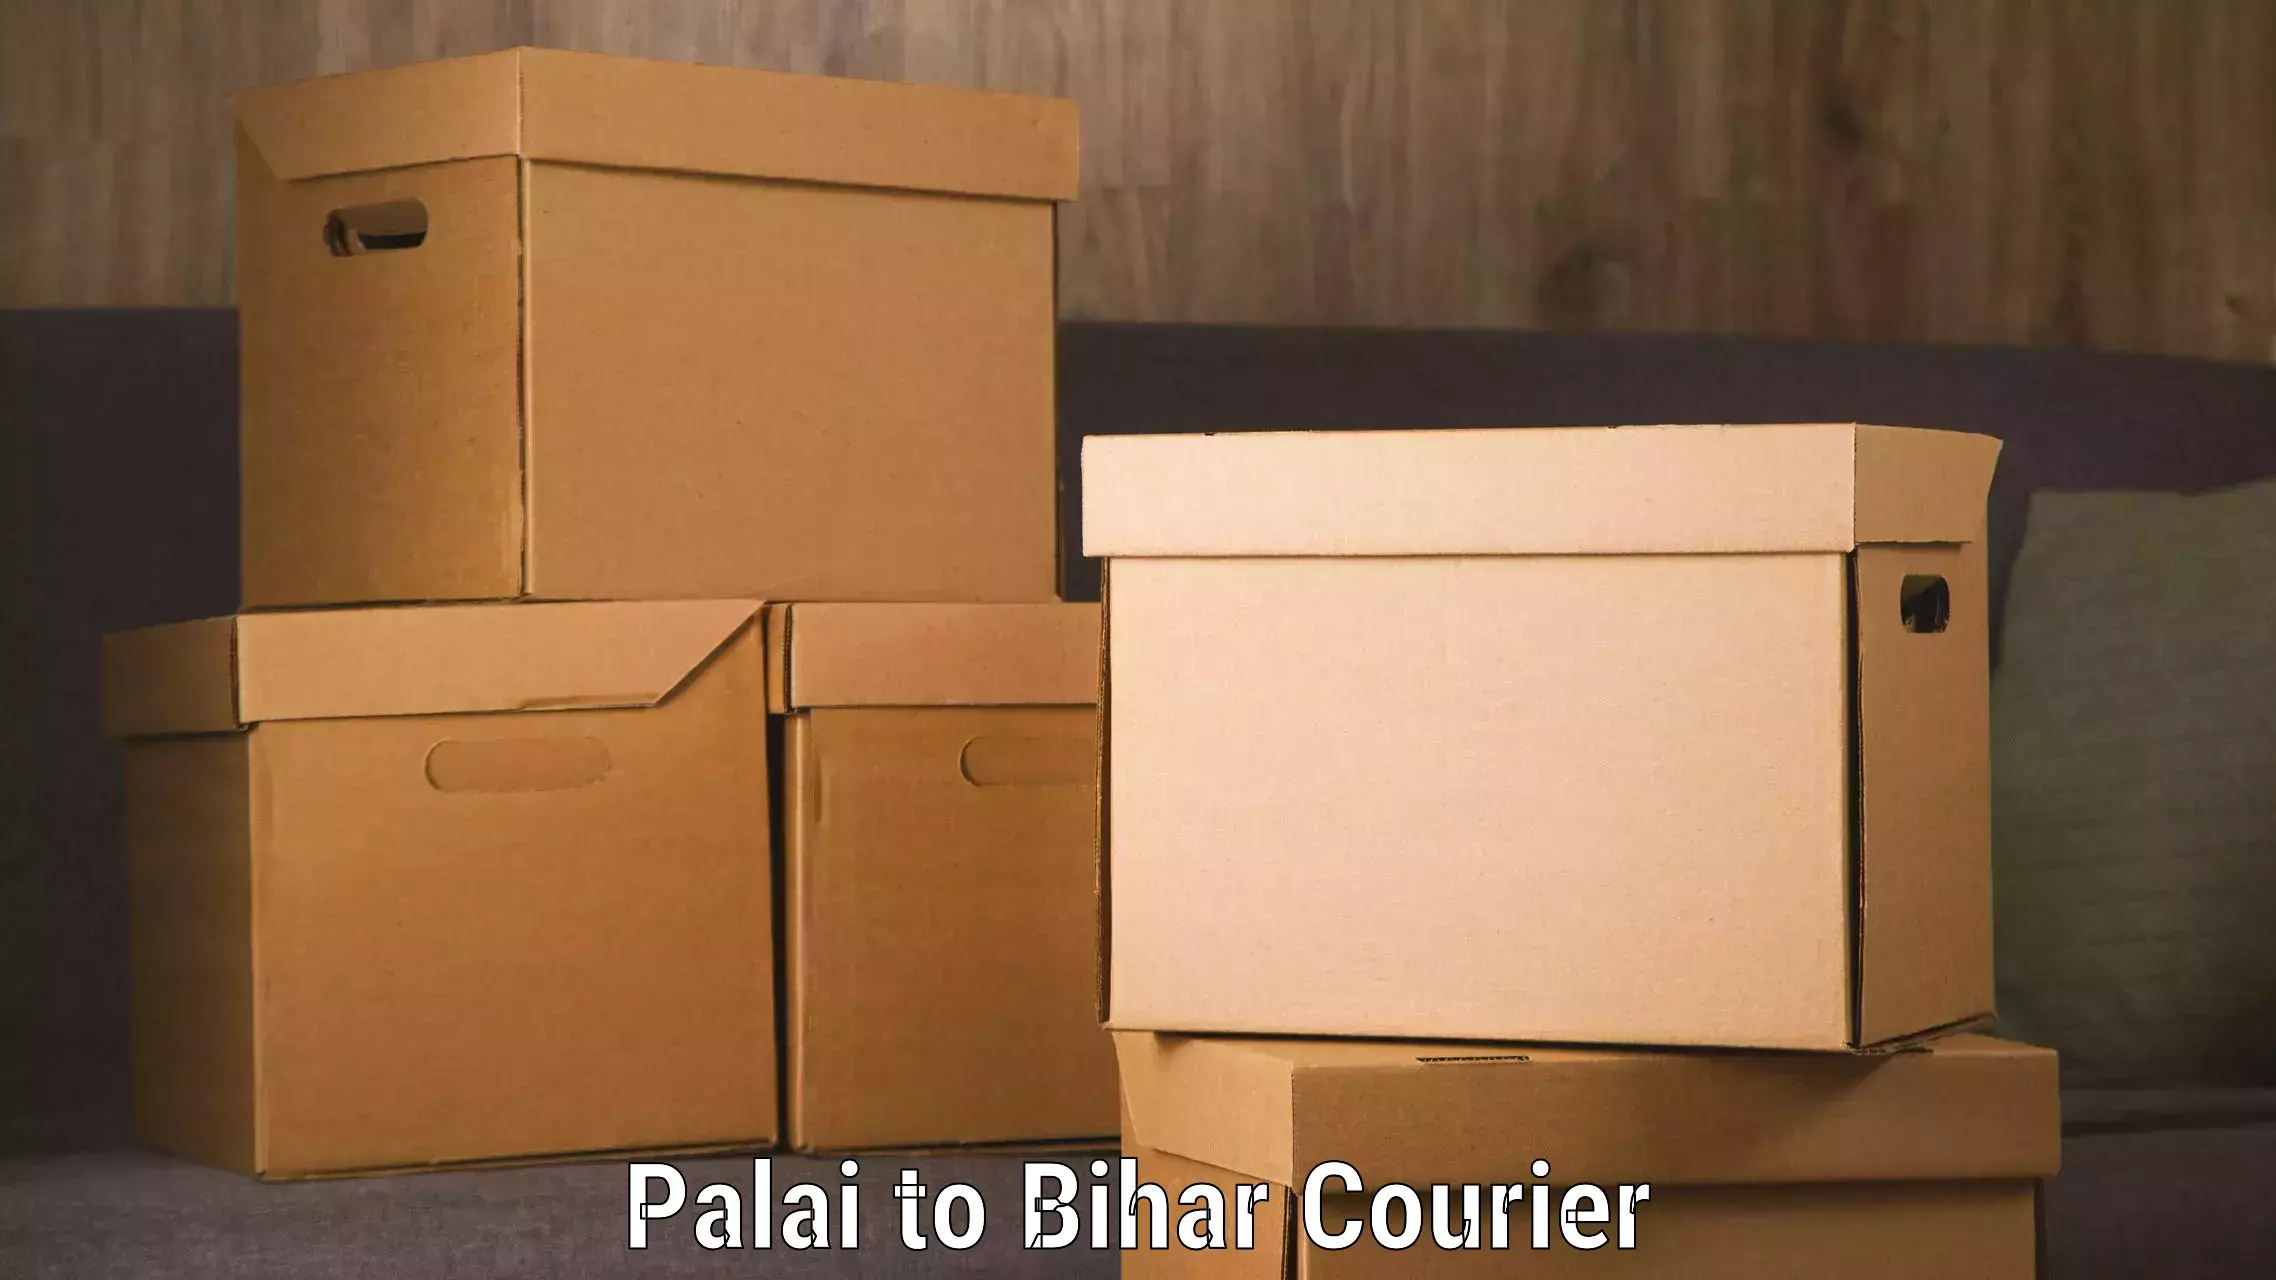 Quick dispatch service in Palai to Bihar